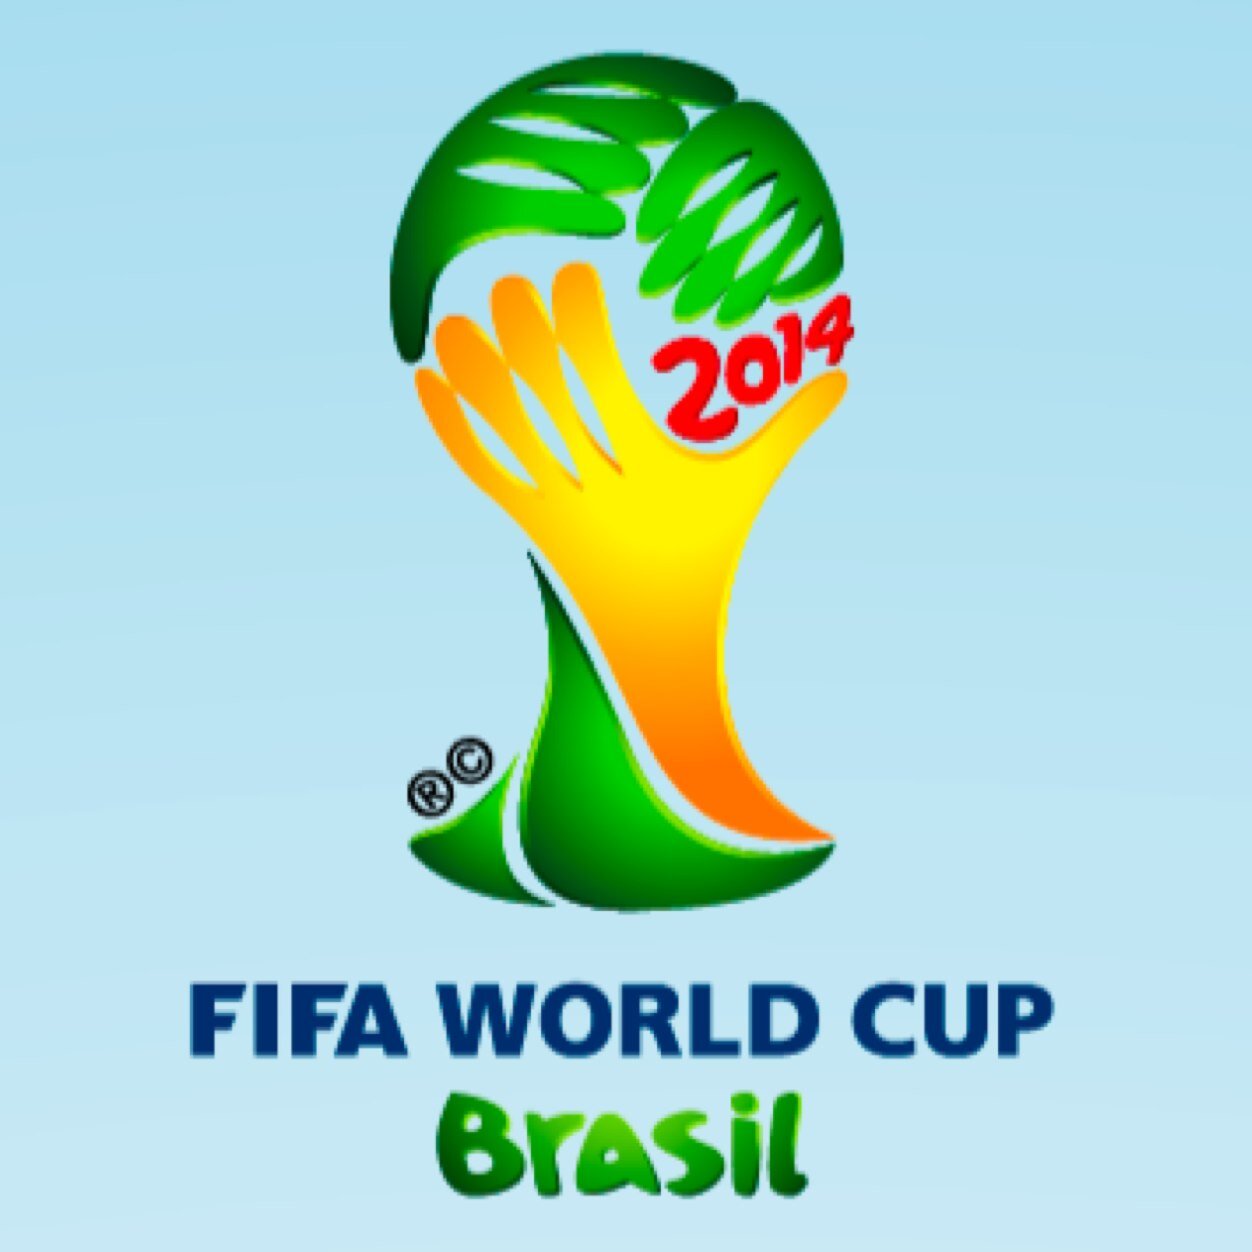 Updates from Brazil provided by the Official Site of the 2014 FIFA World Cup.